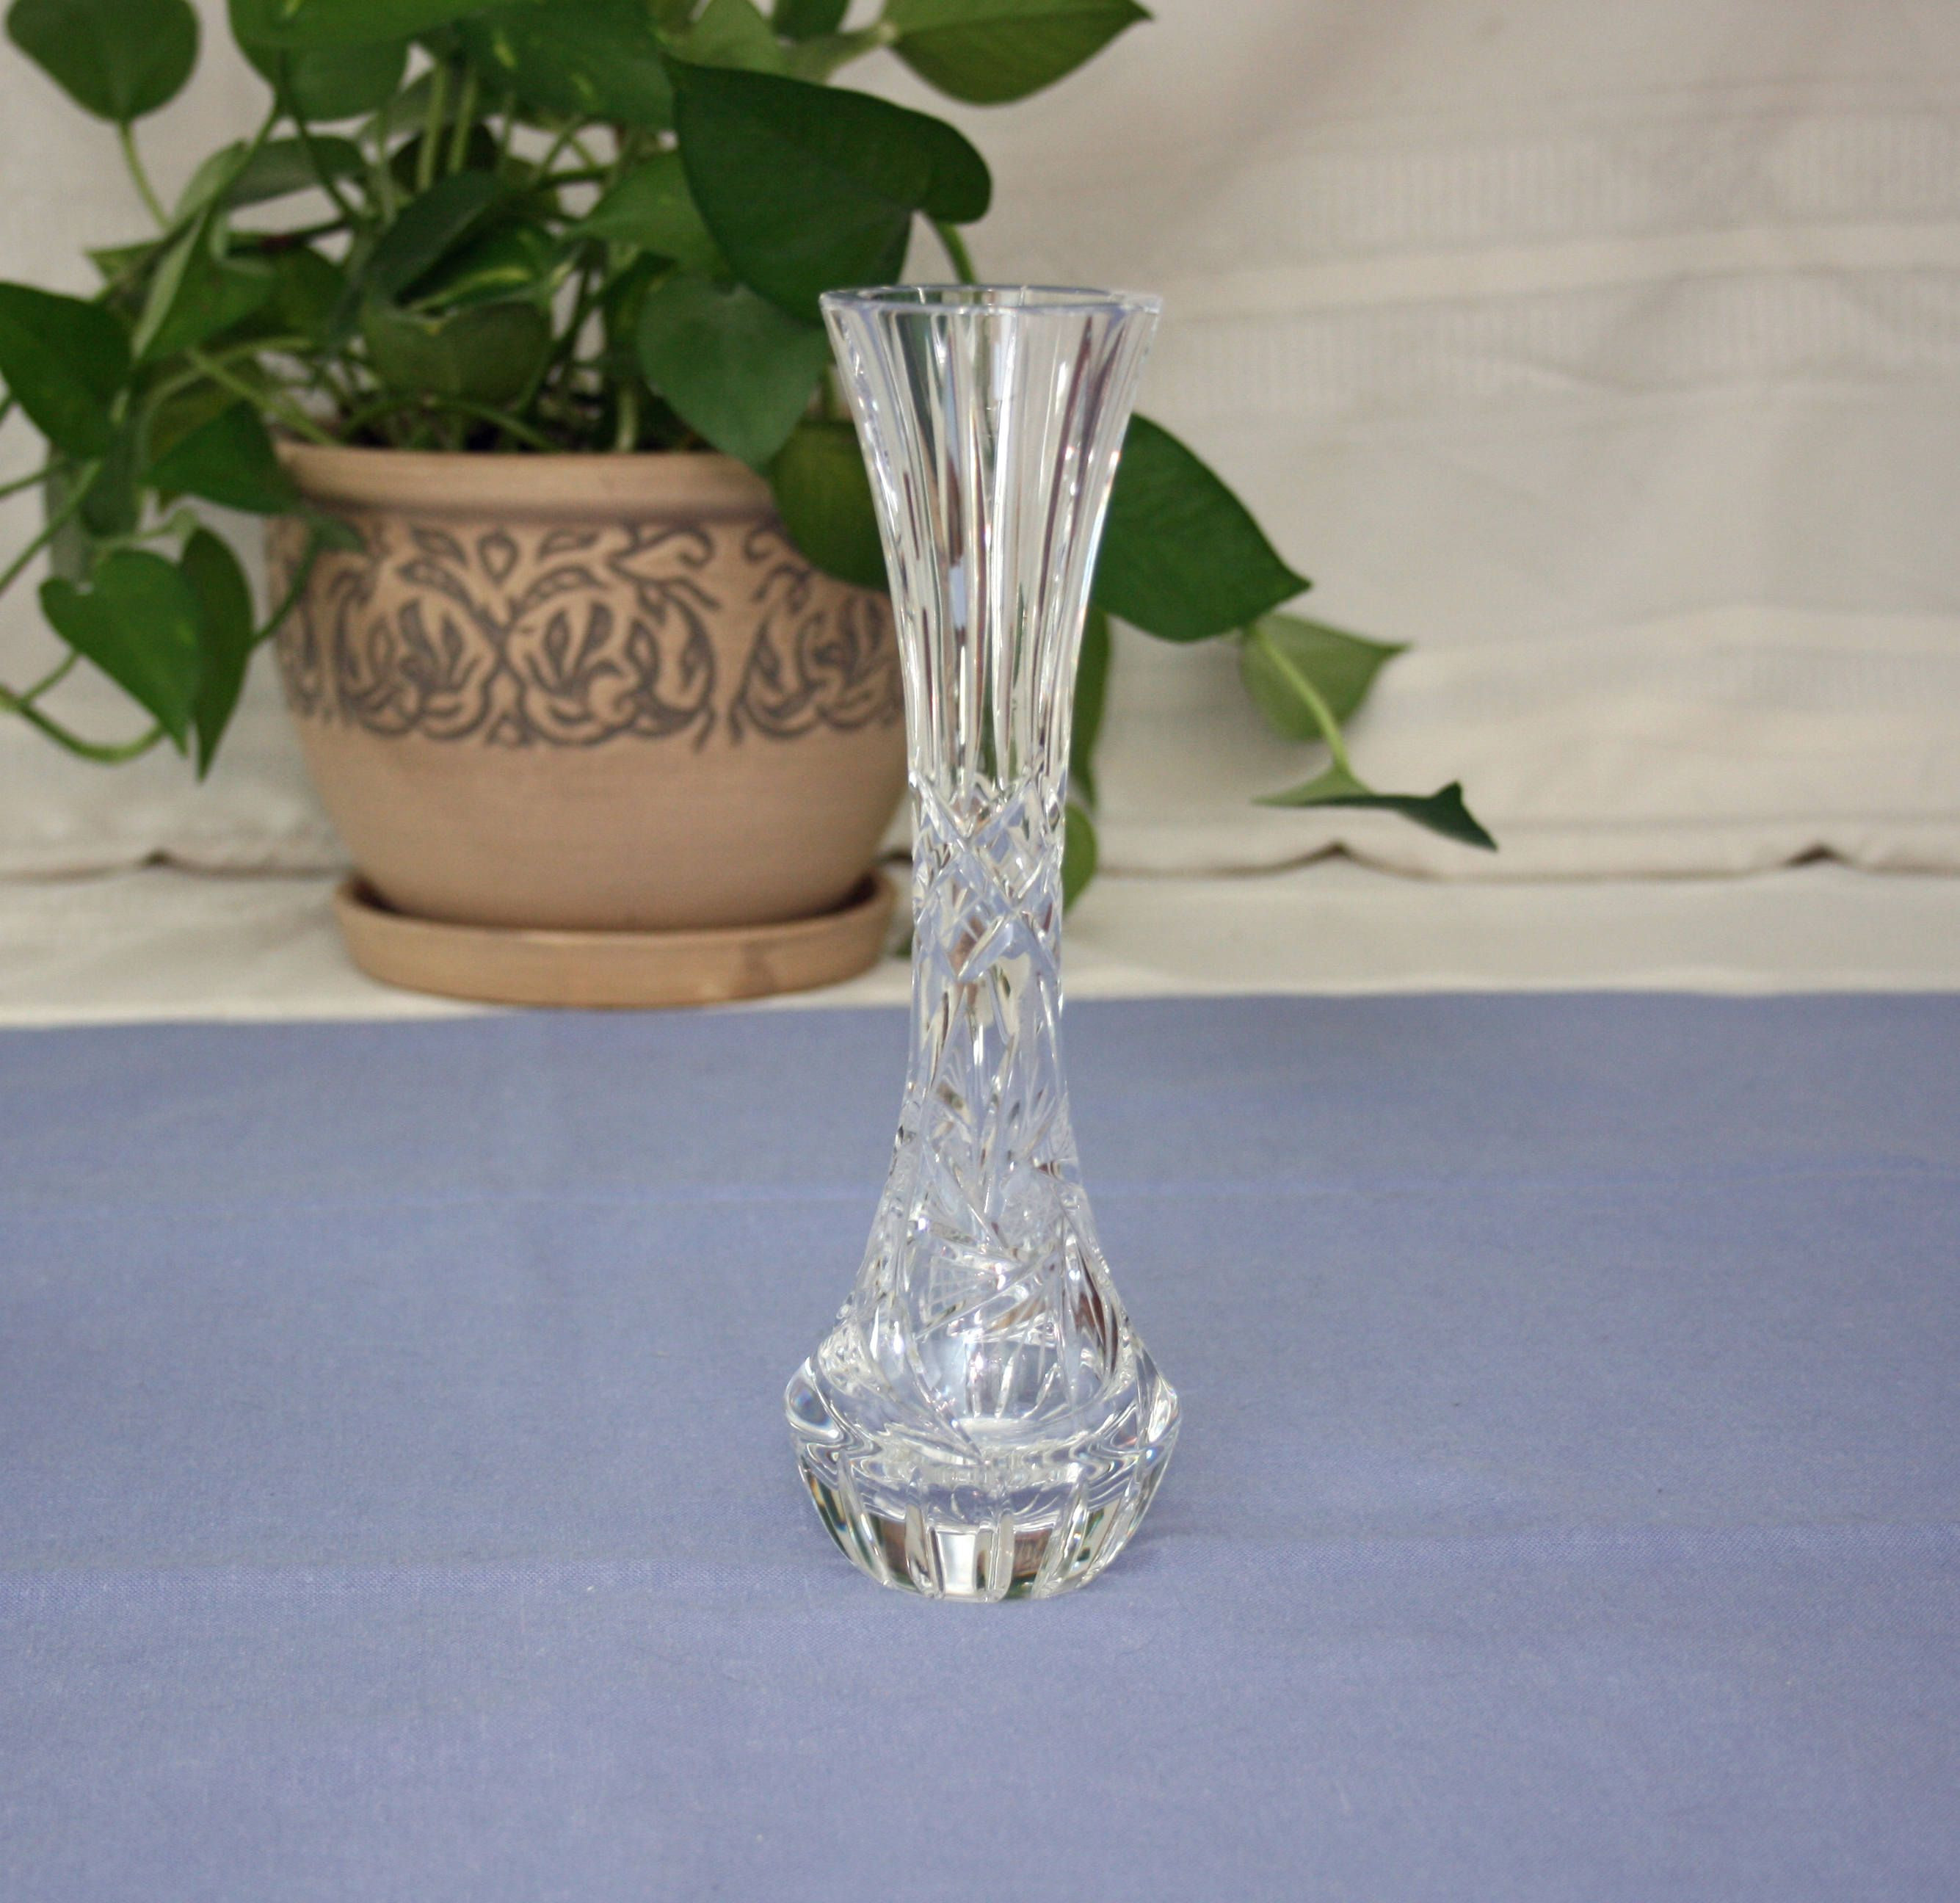 20 Amazing Etched Glass Bud Vase 2024 free download etched glass bud vase of vintage pair 6 inch pressed glass candlesticks with hand c within vintage lead crystal fluted bud vase hand cut swirled star pinwheel flower glass vase home decor